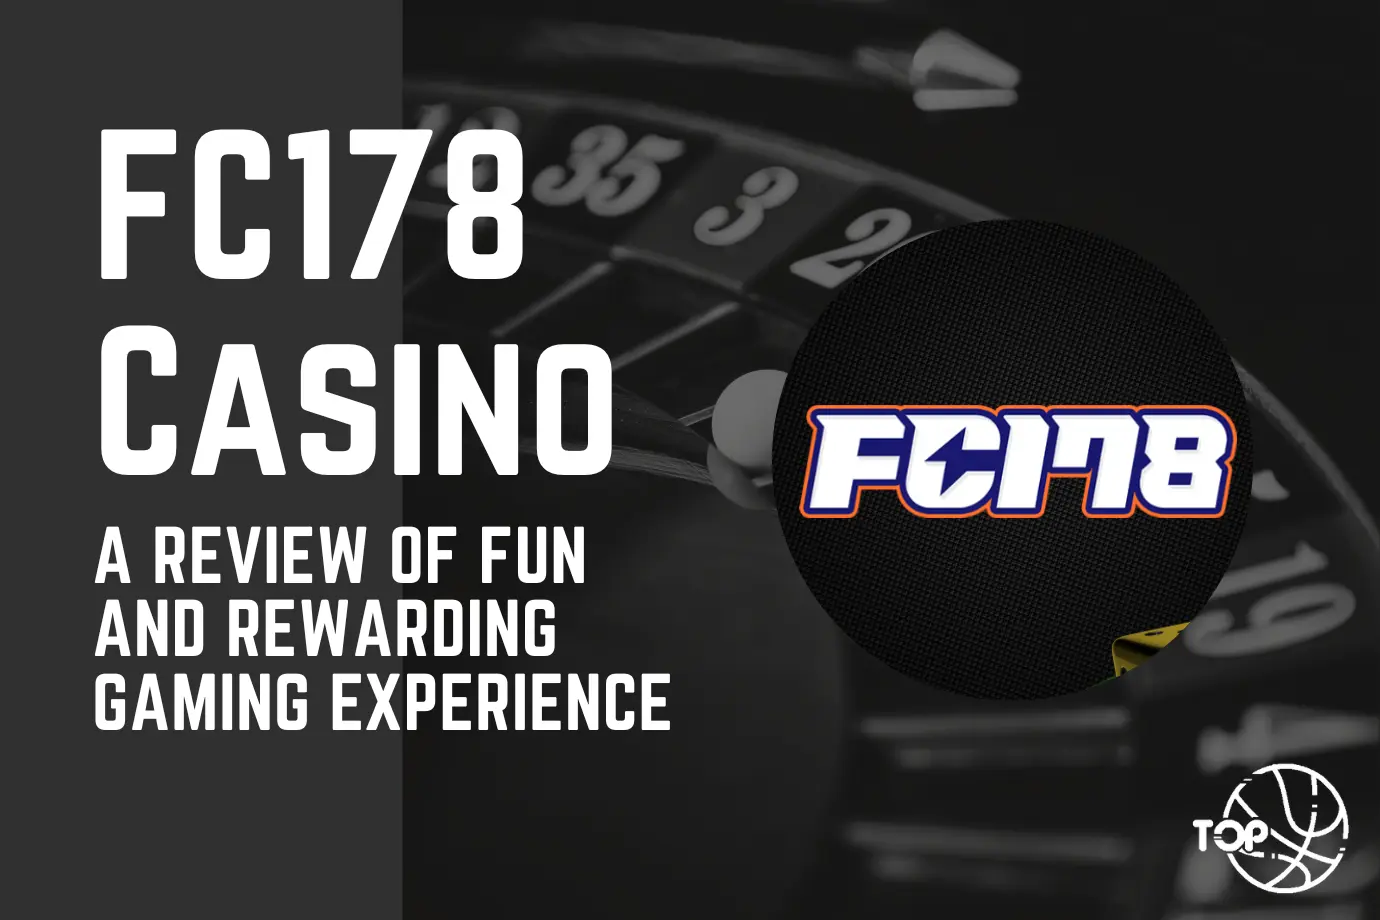 FC178 Casino: A Review of Fun and Rewarding Gaming Experience